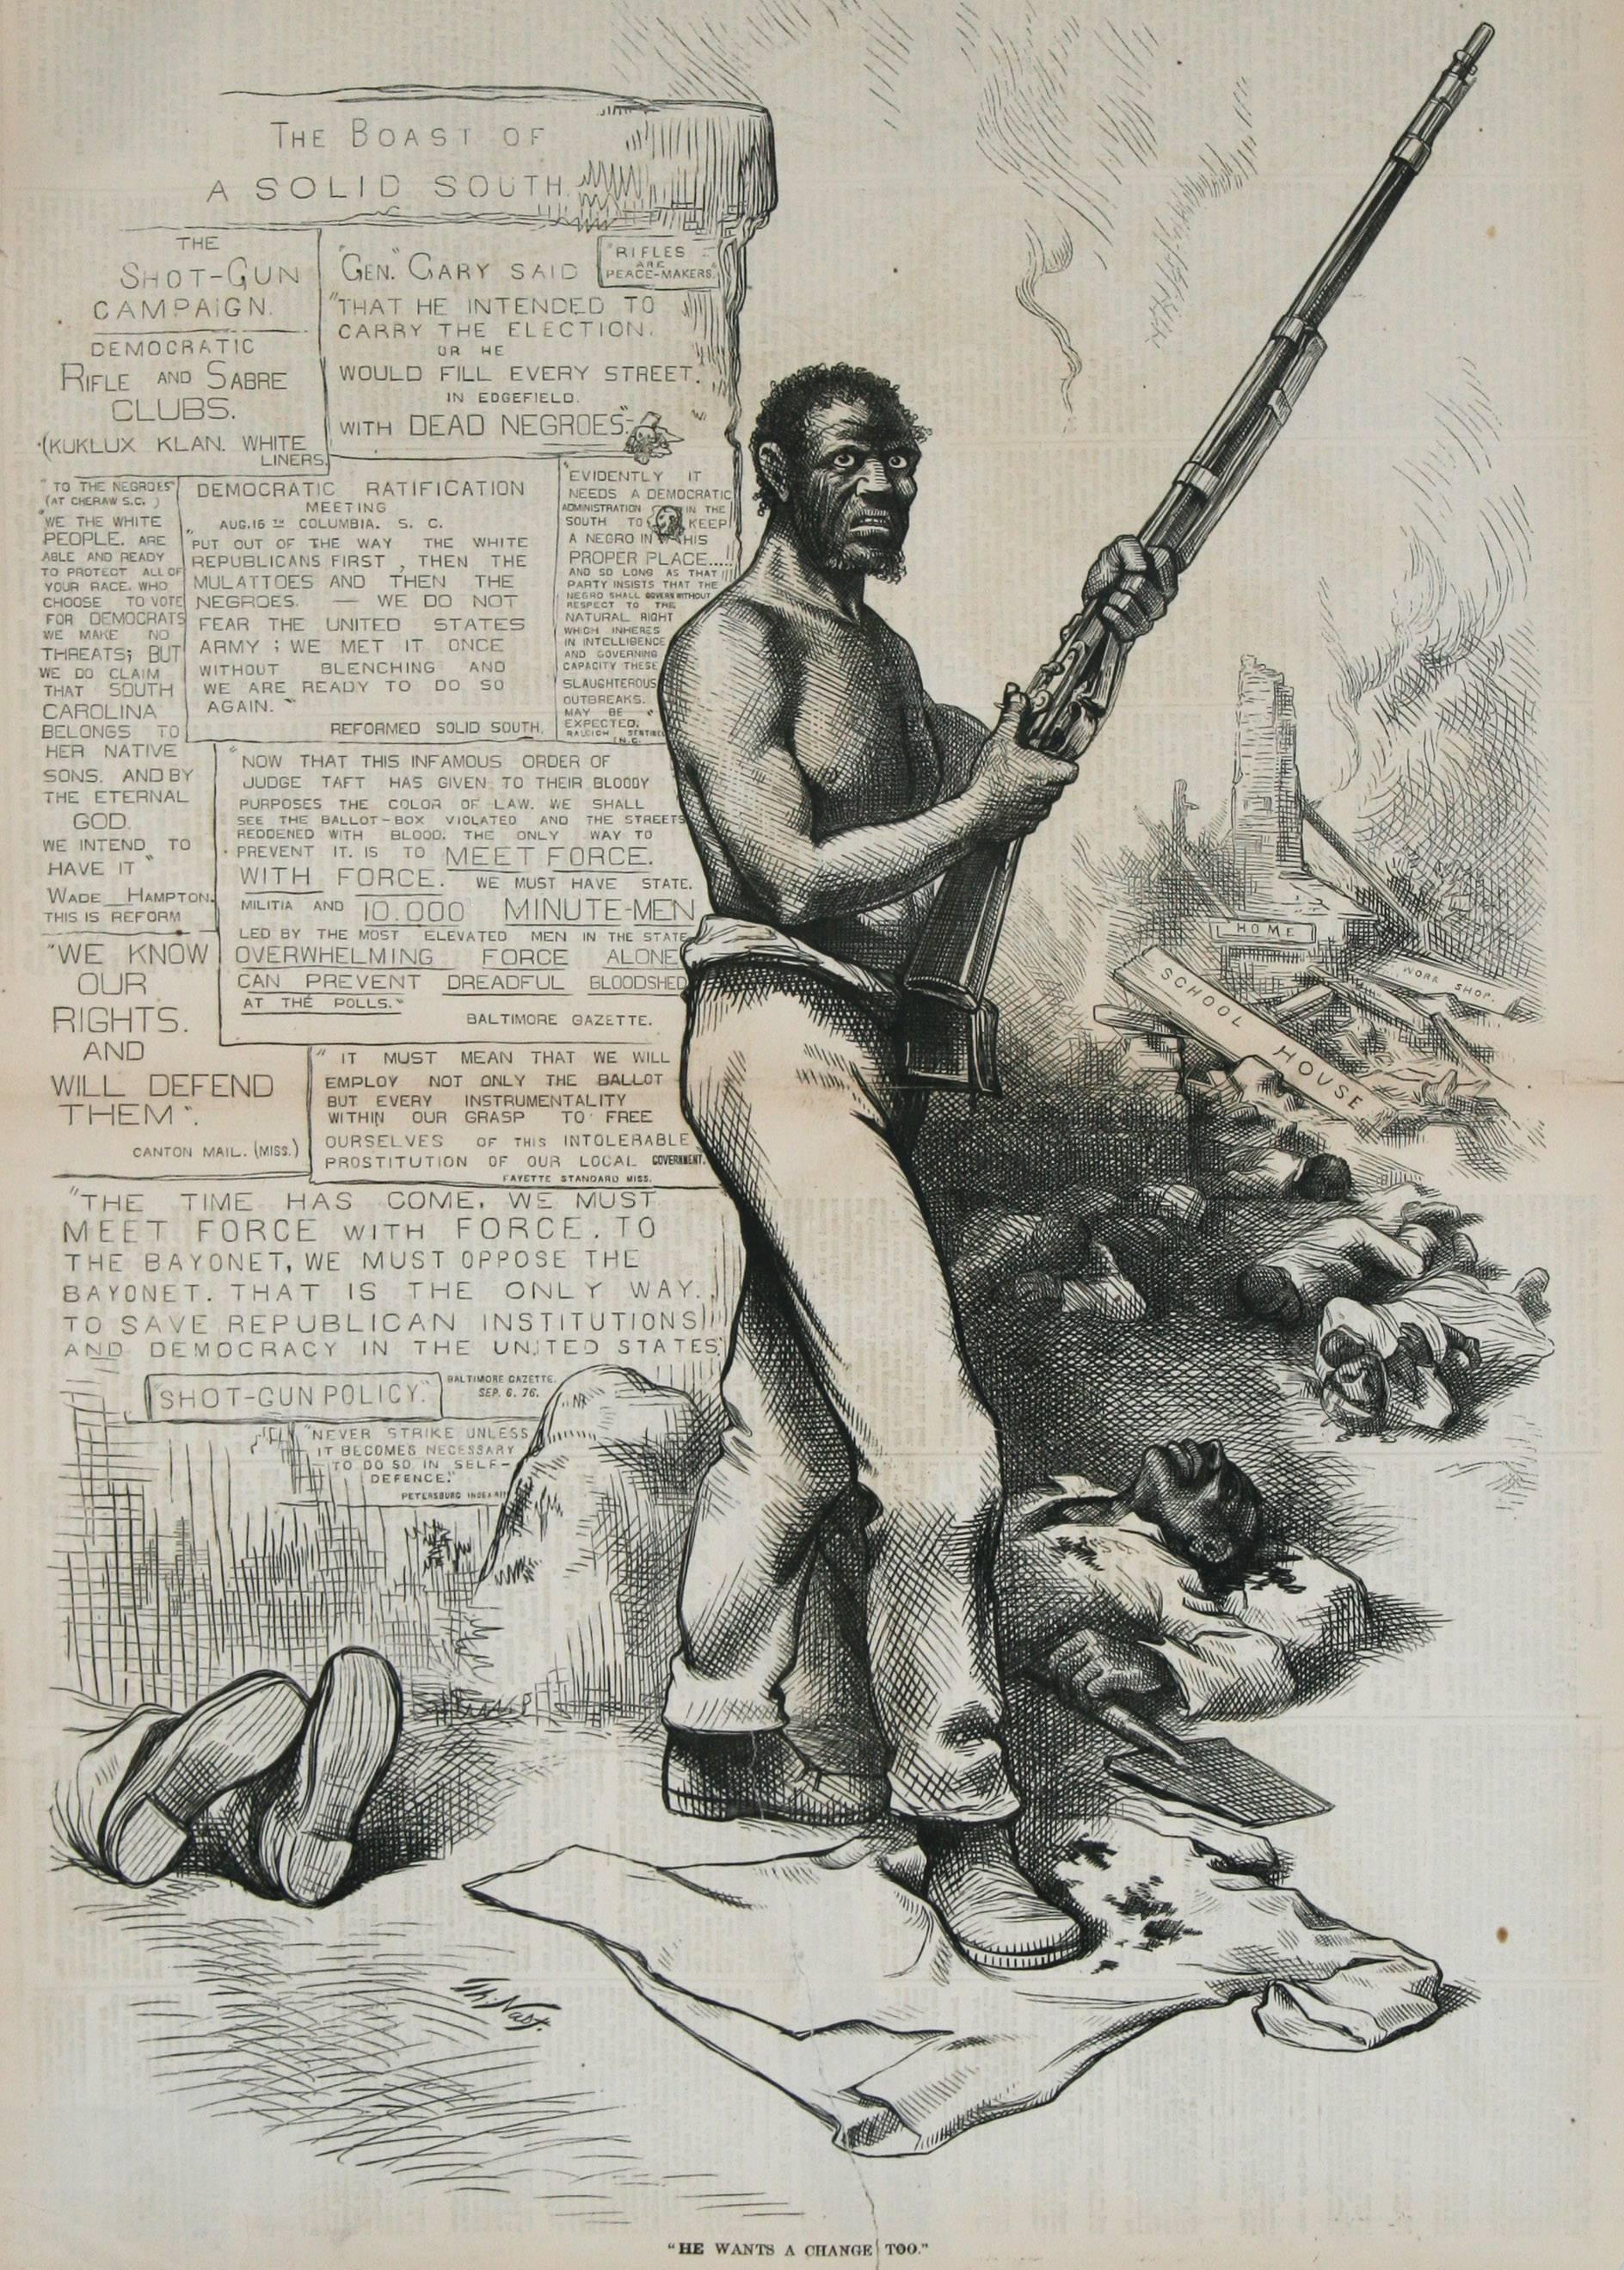 Thomas Nast Figurative Print - He Wants a Change Too, from "Harper's Weekly"